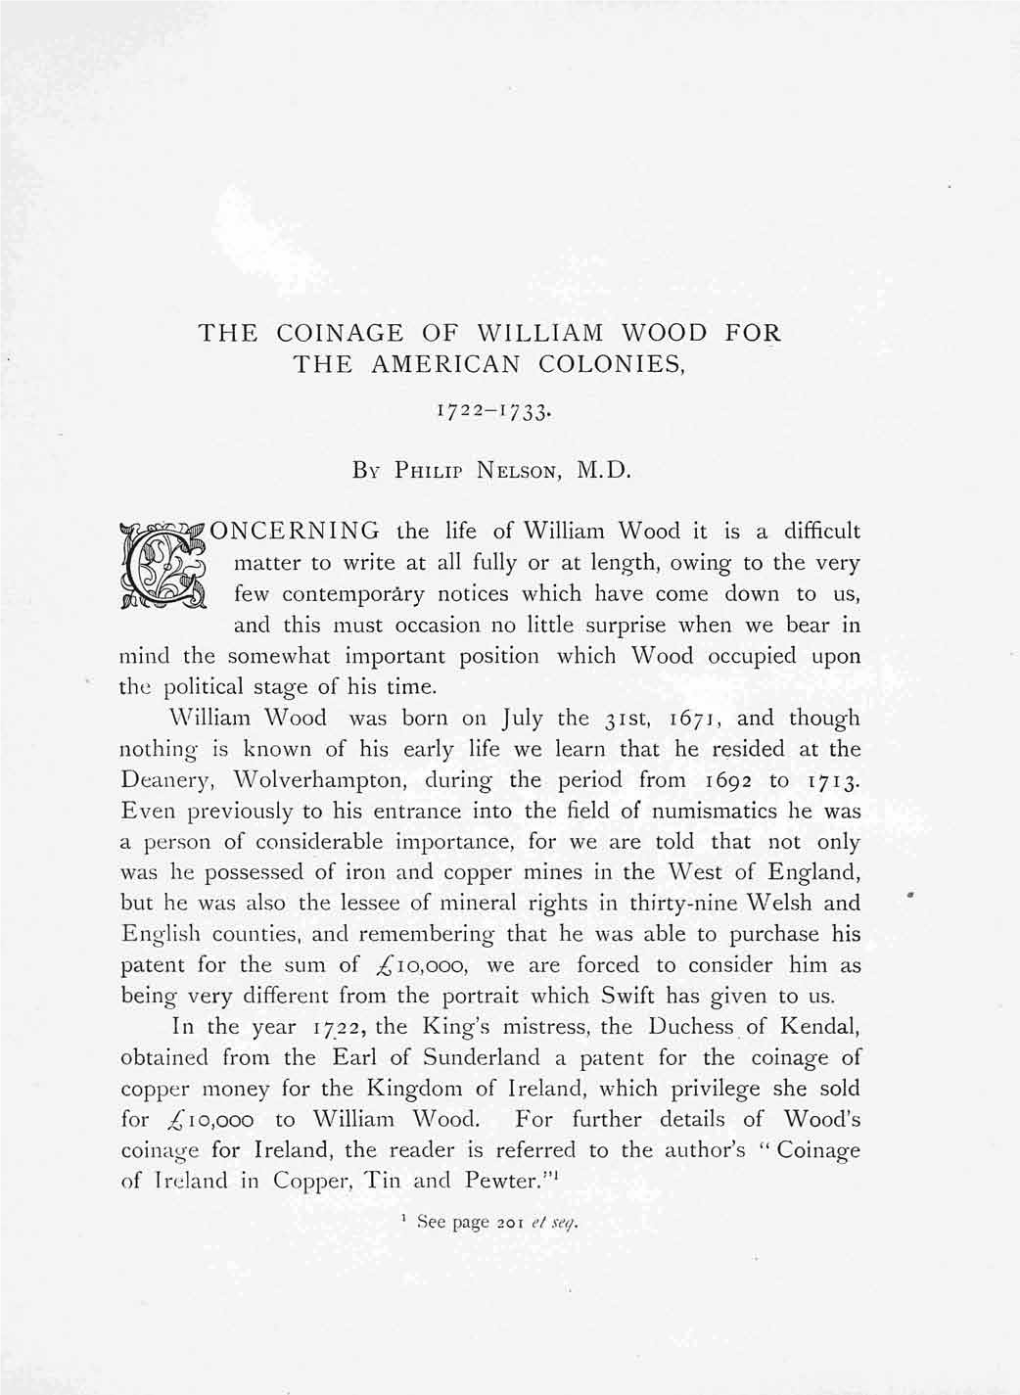 THE COINAGE of Vvilliam Vvood for the AMERICAN COLONIES, by PH1L1P NELSON, M.D. Ri"ONCERNING the Life of William Wood It Is